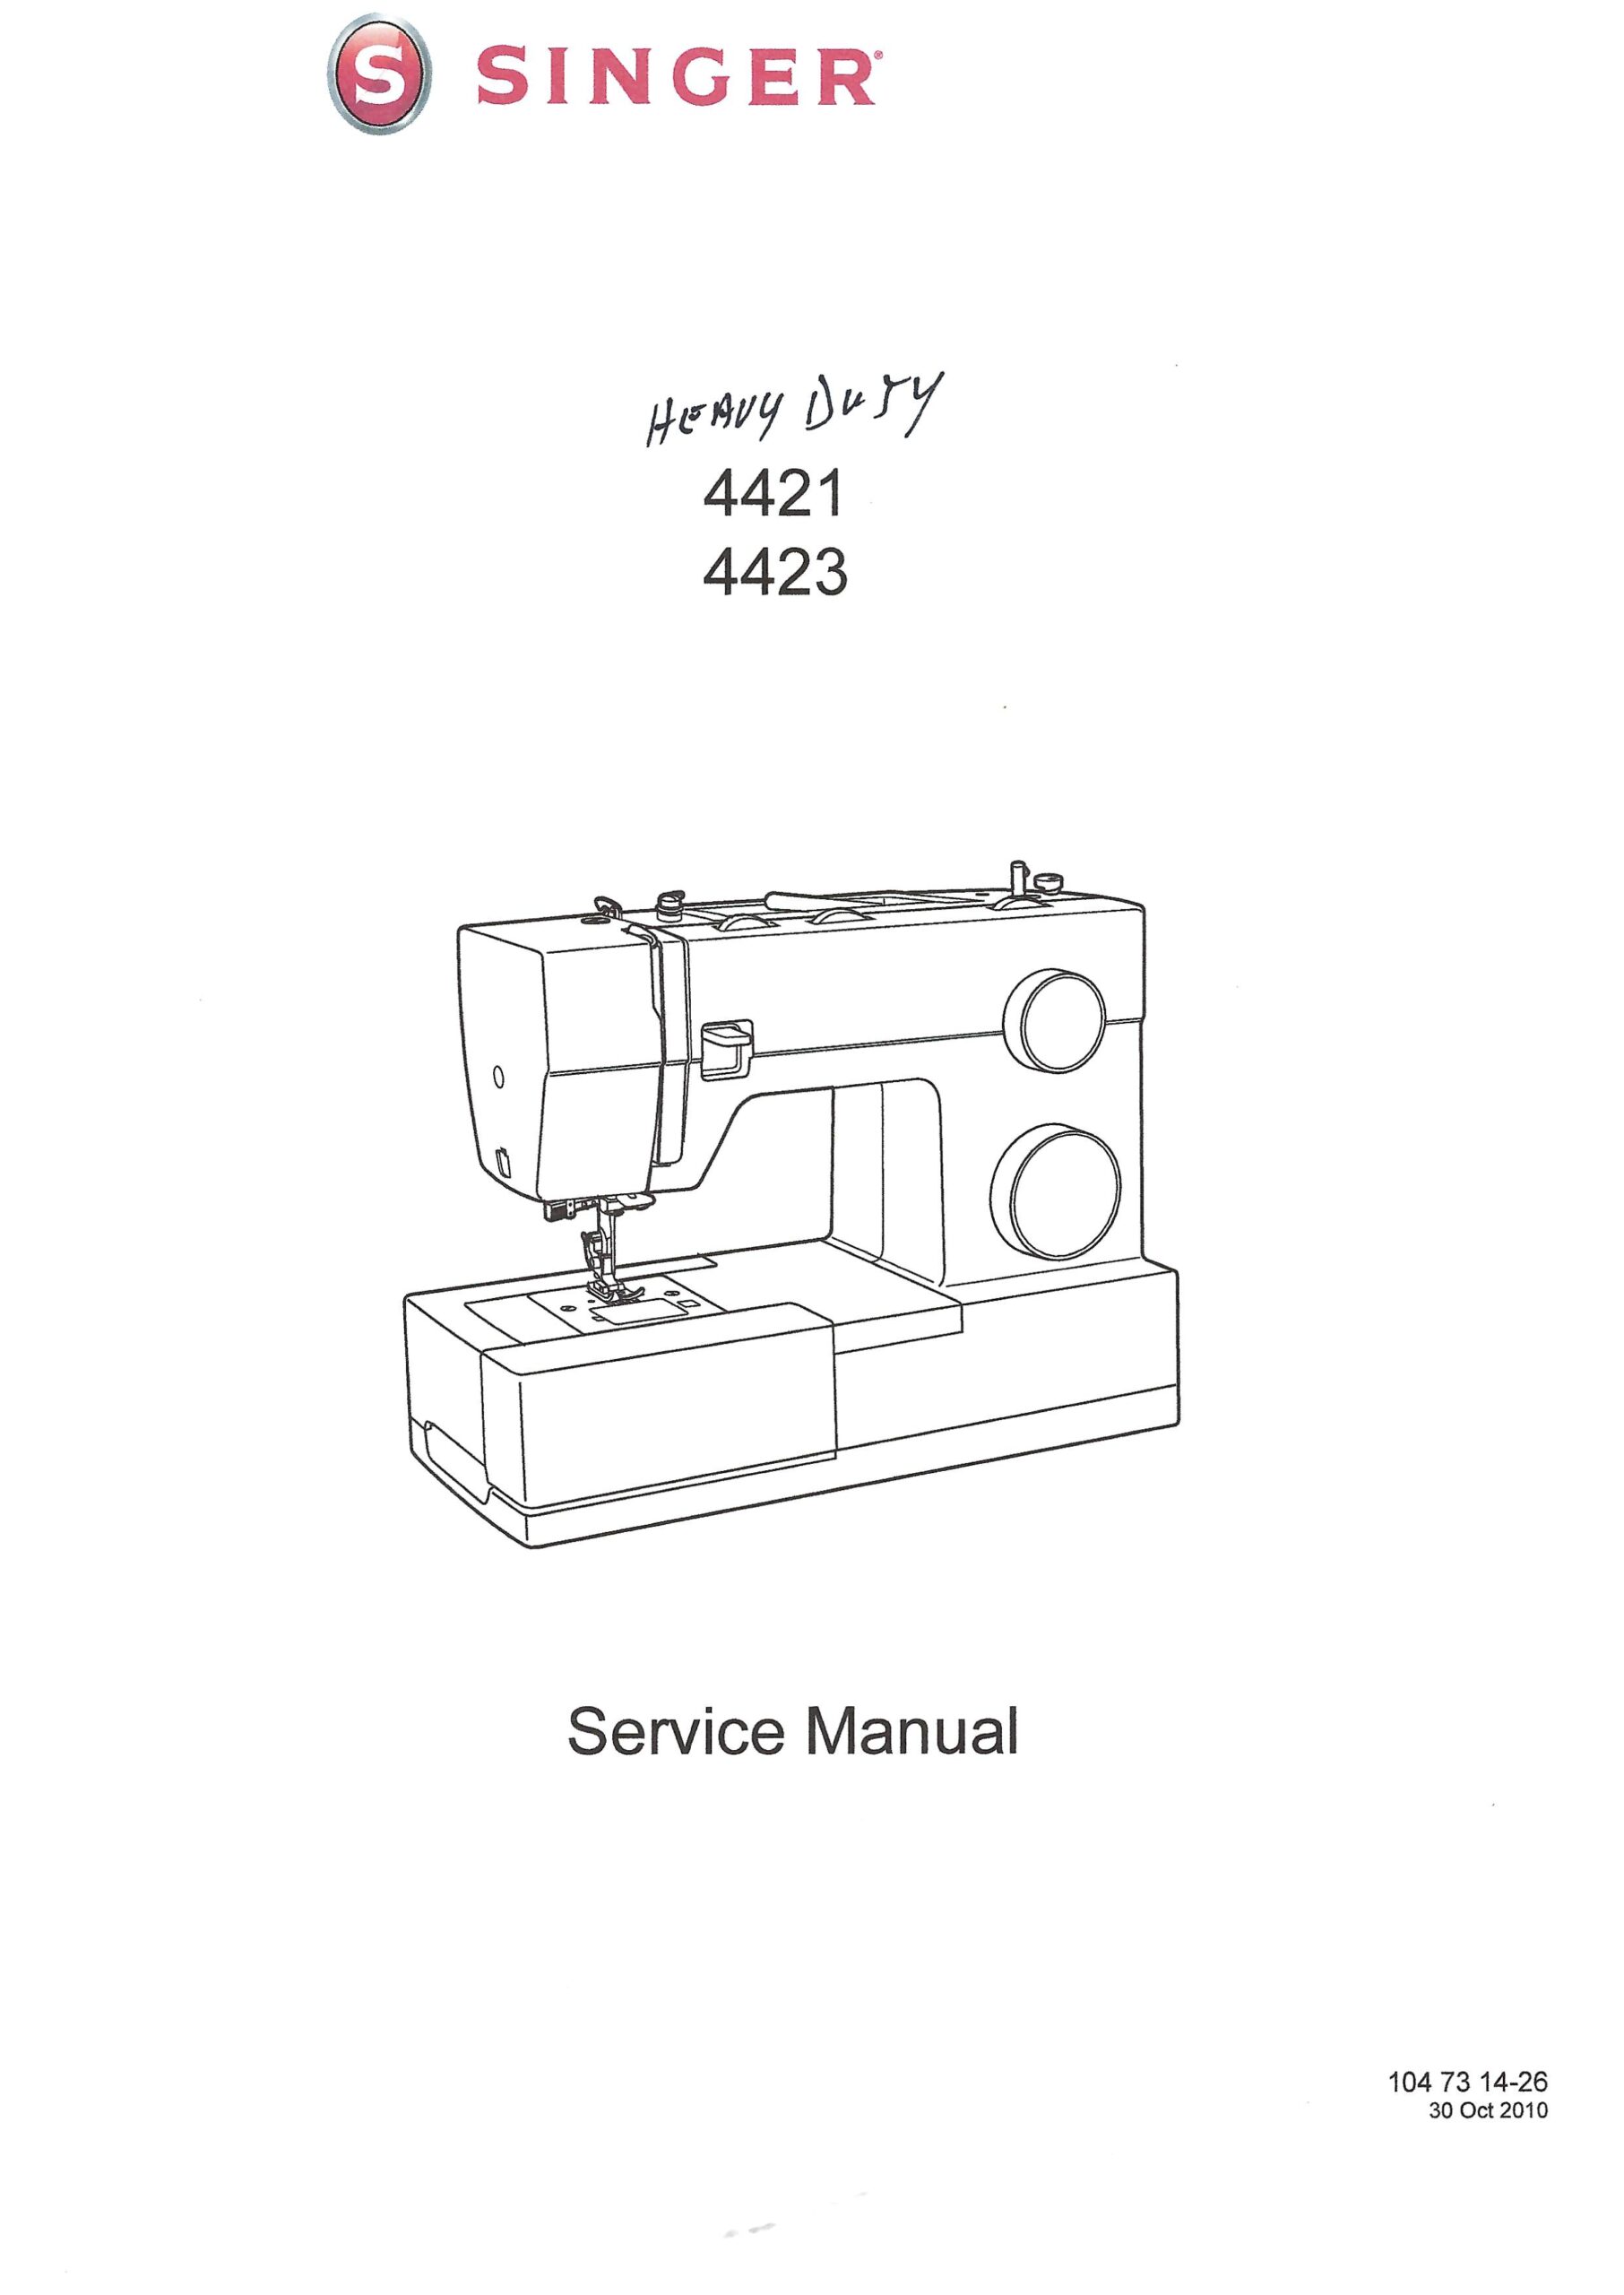 User manual Singer Heavy Duty 4423 (English - 65 pages)